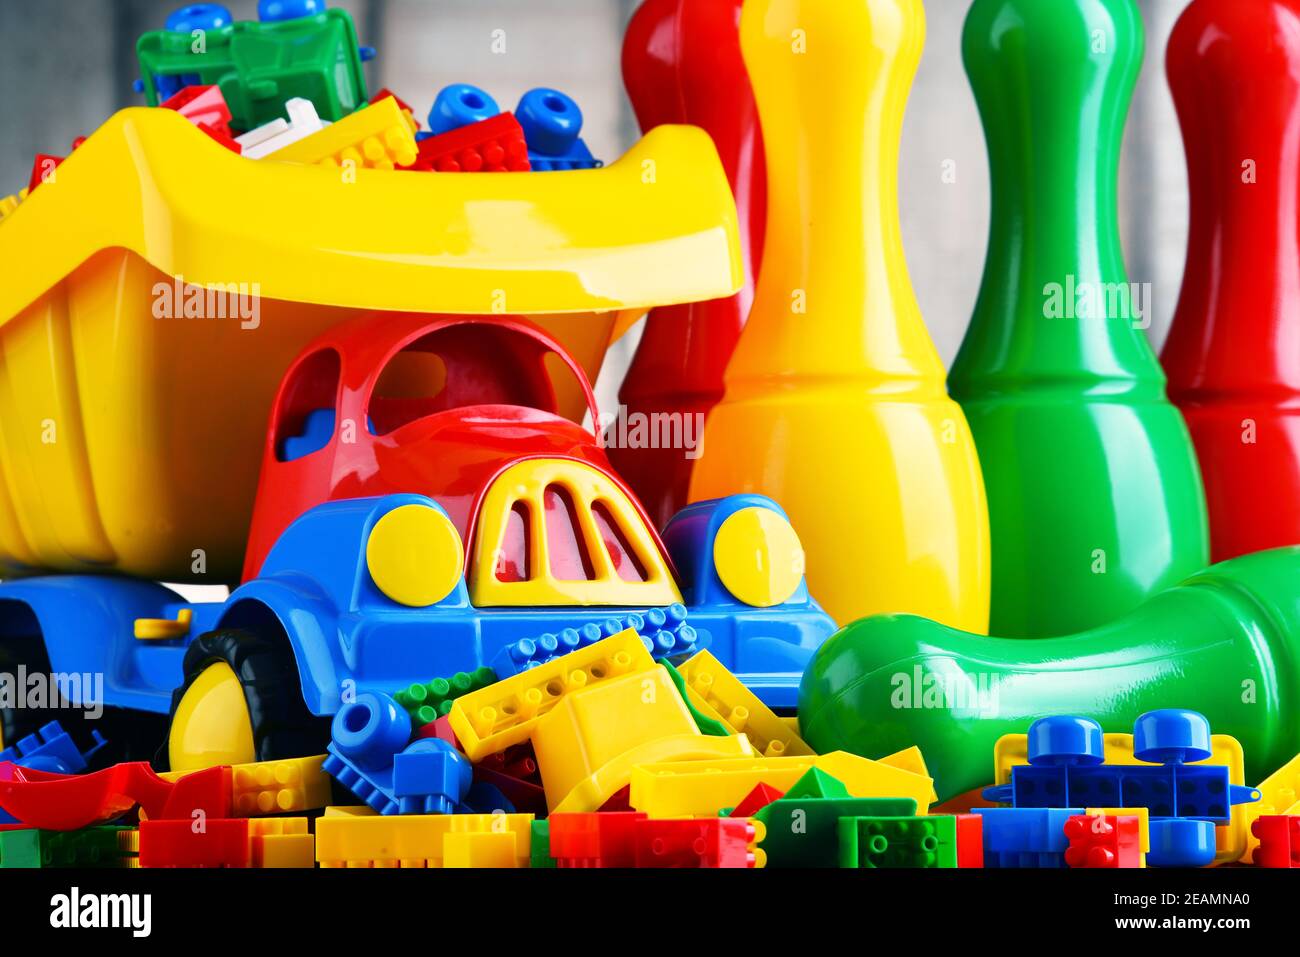 Colorful plastic toys in children's room Stock Photo